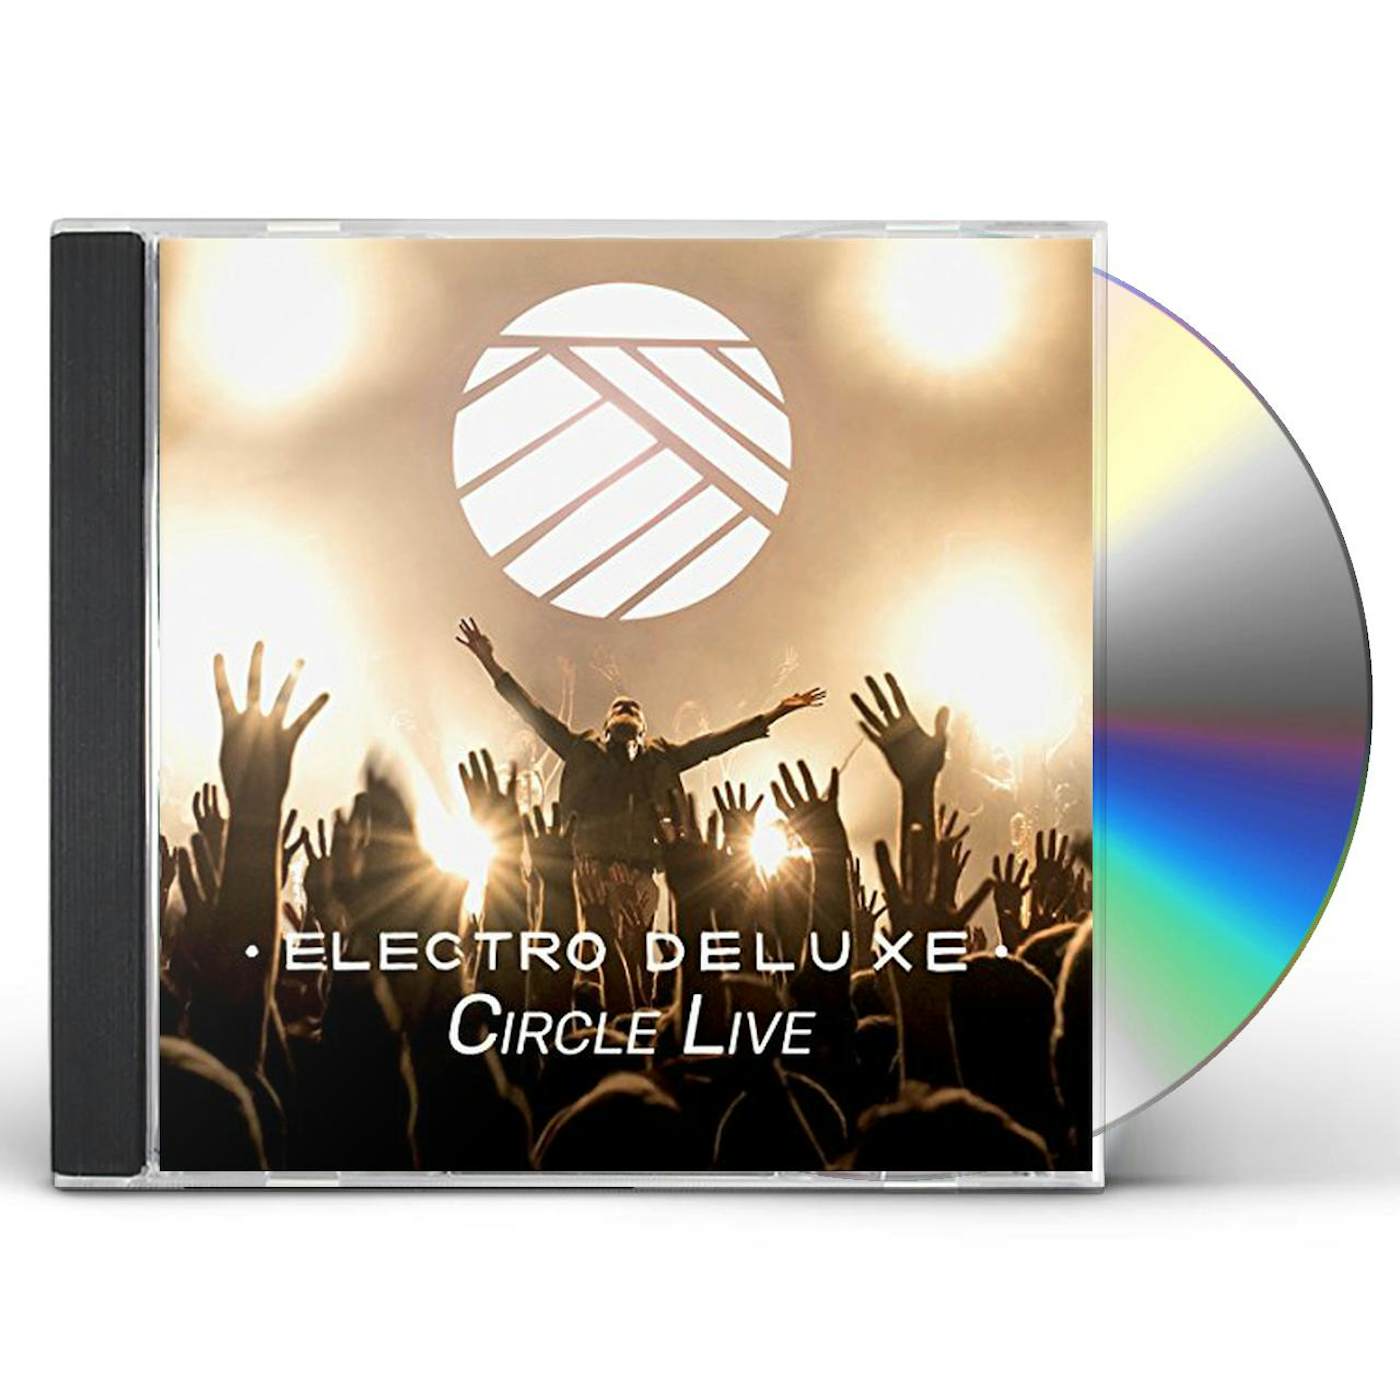 Electro Deluxe CIRCLE LIVE CD